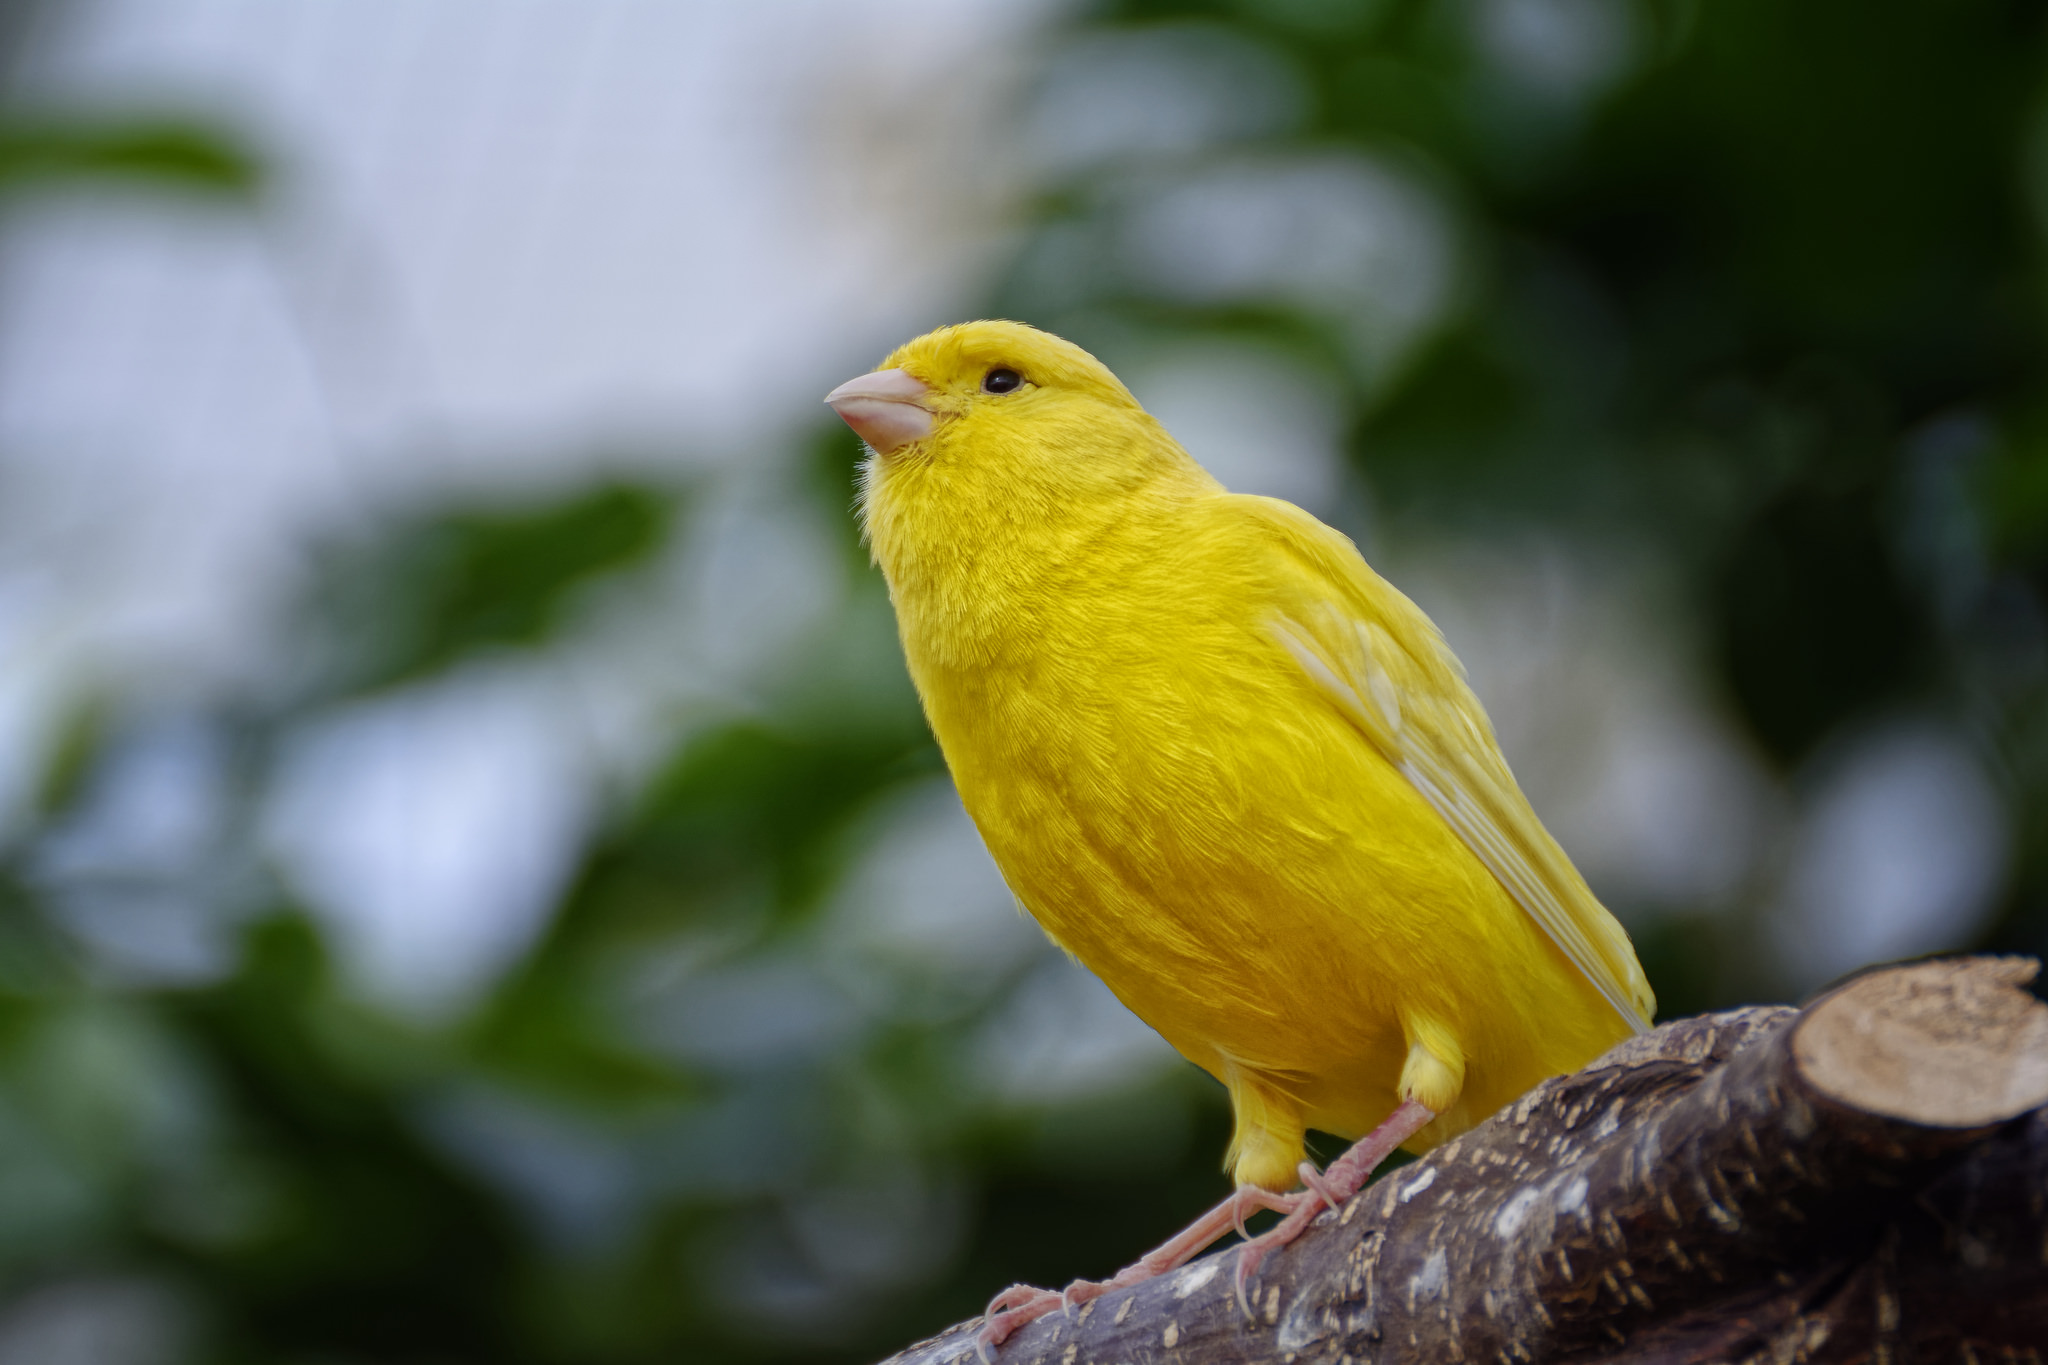 WALLPAPER SEPTEMBER 2020 – Canary Yellow